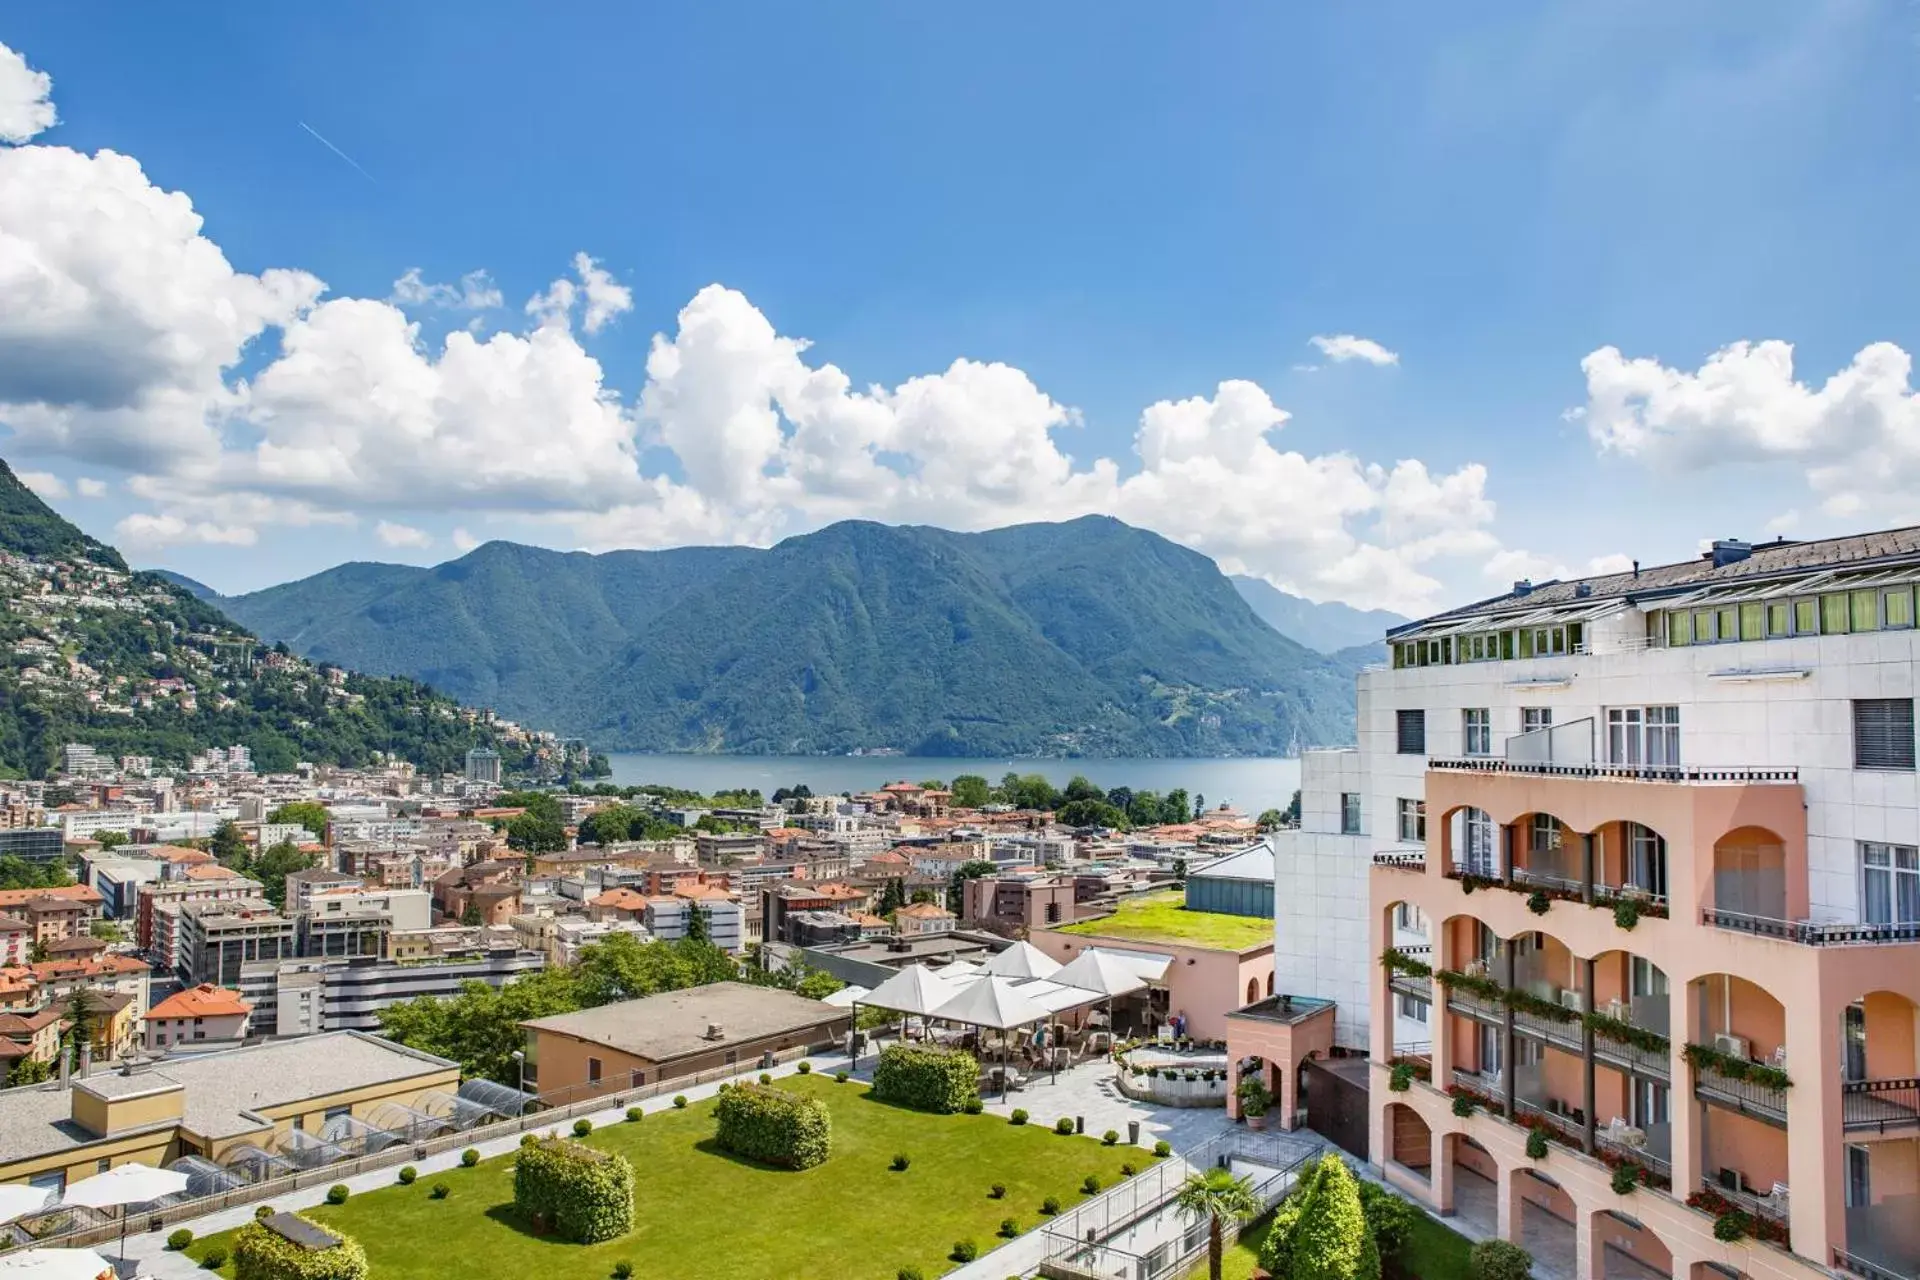 City view in Villa Sassa Hotel, Residence & Spa - Ticino Hotels Group